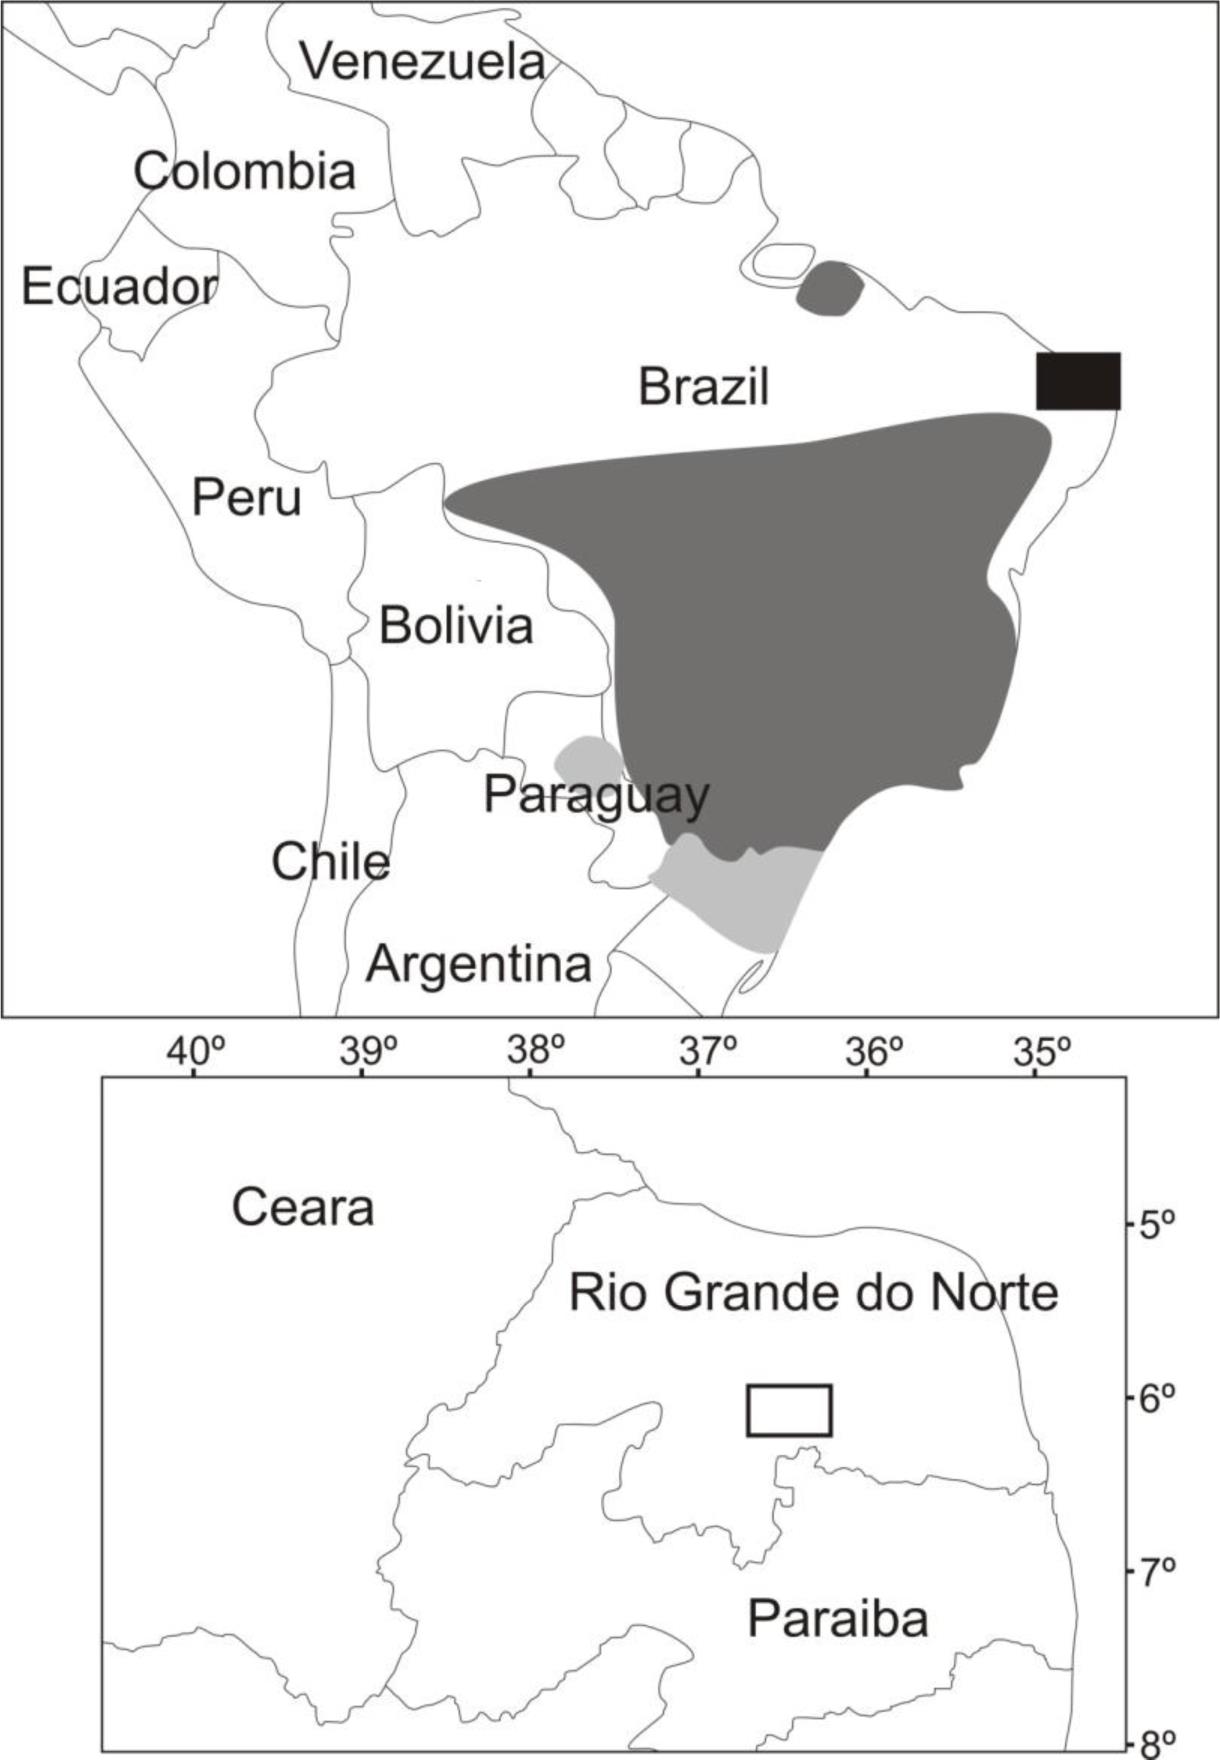 Intensity of the HFP across Brazil and four Neotropical